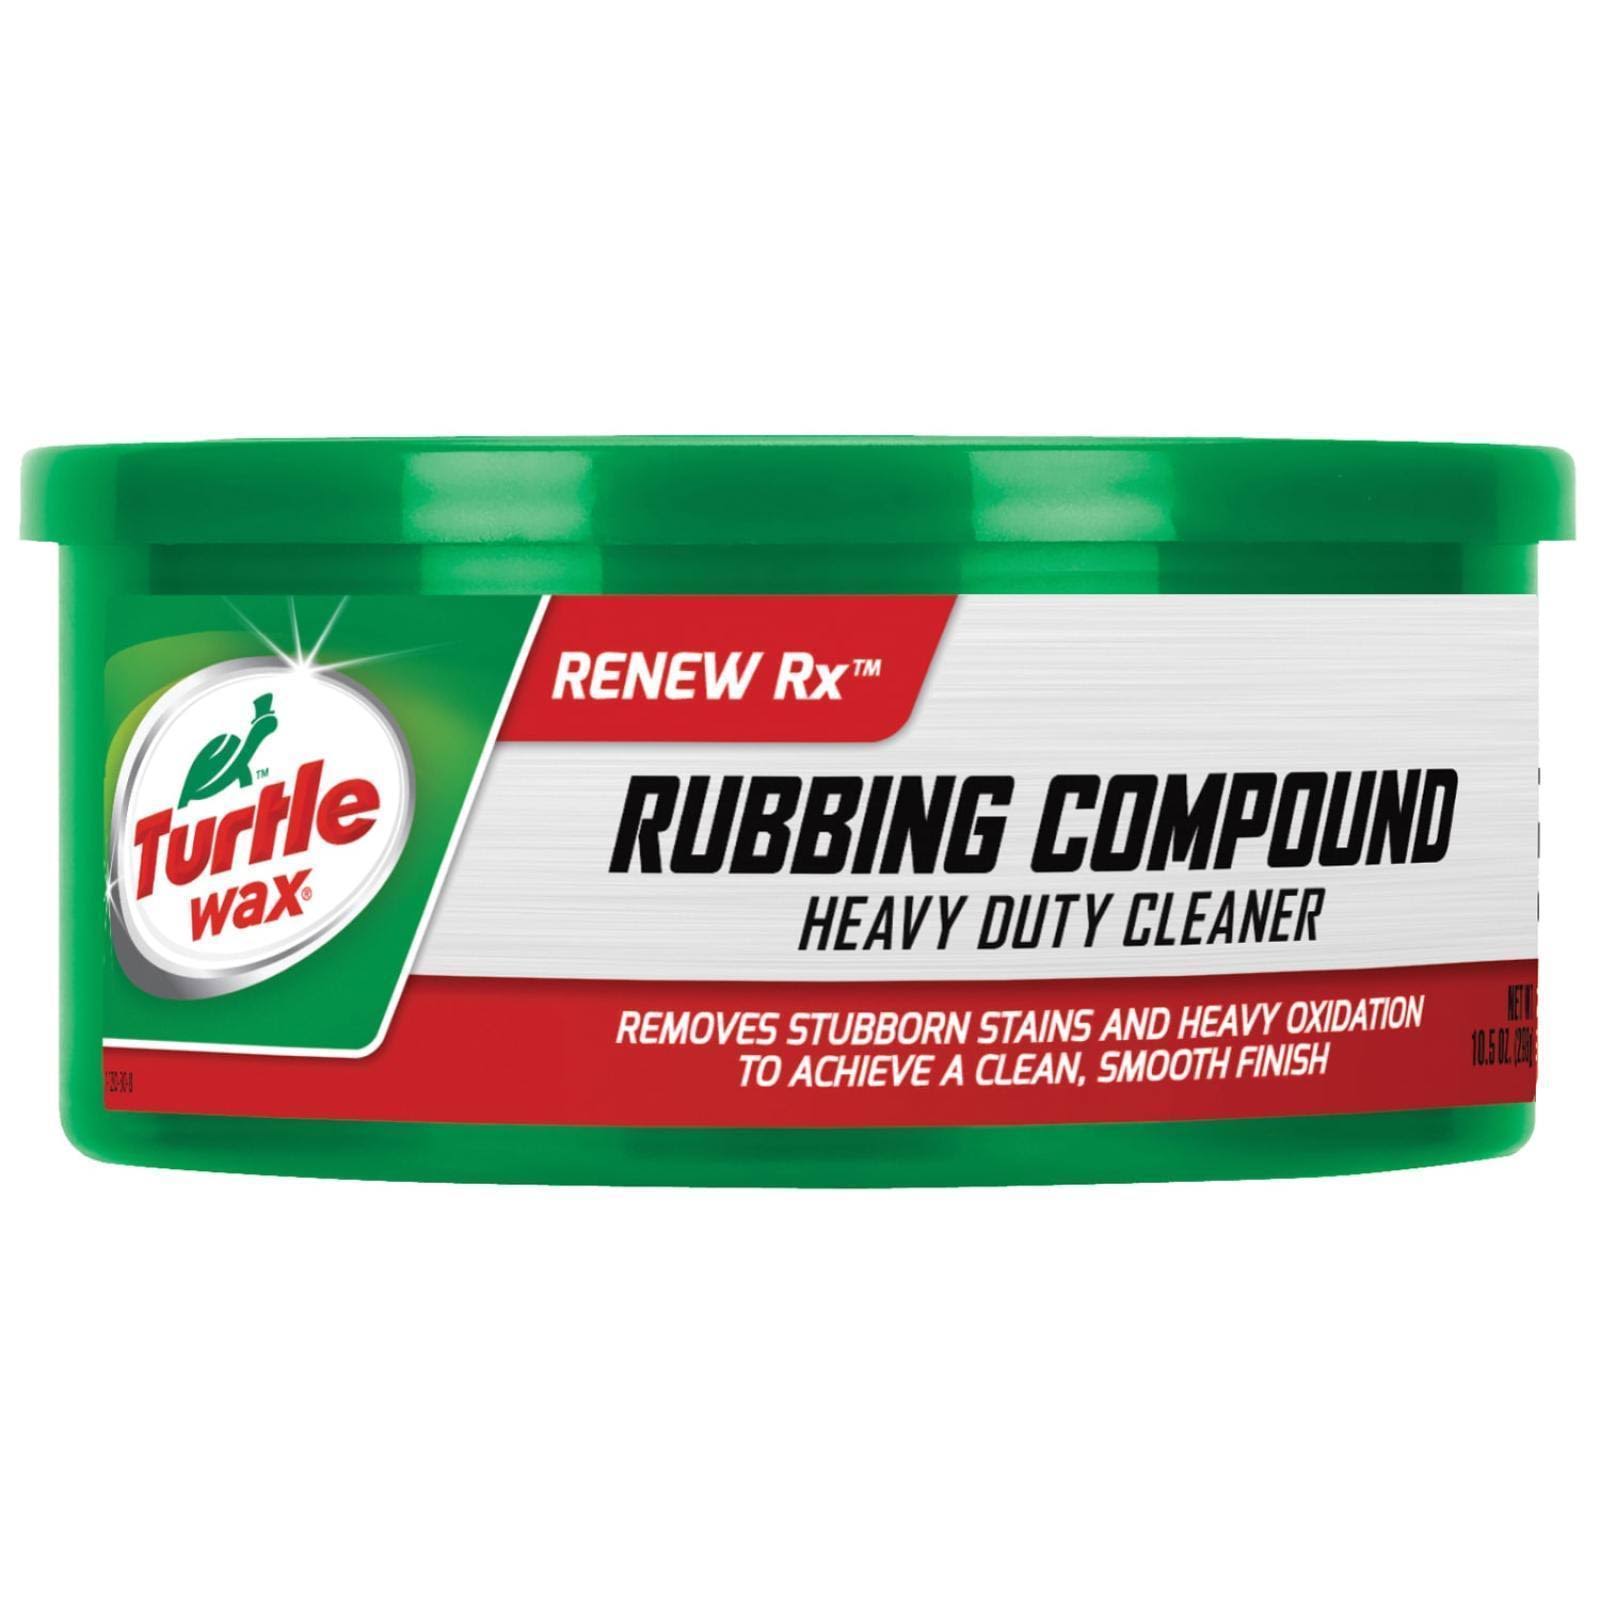 Turtle Wax Rubbing Compound Heavy Duty Cleaner